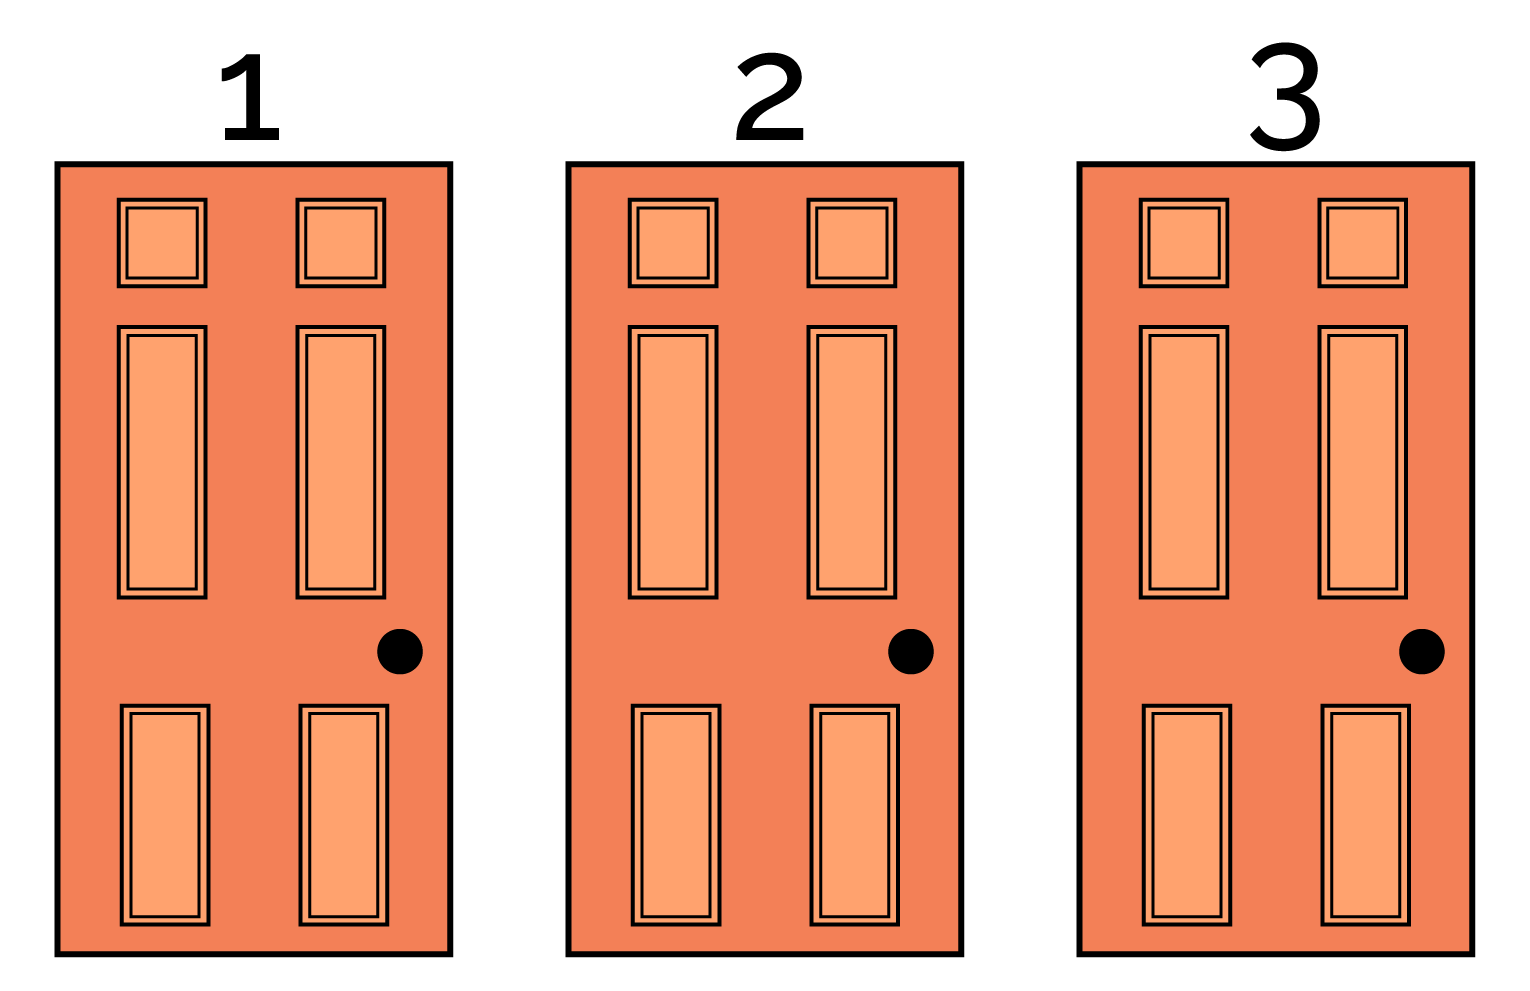 The Monty Hall Problem starts with three closed doors.  One door contains $1,000,000 and the other two contain nothing of value.